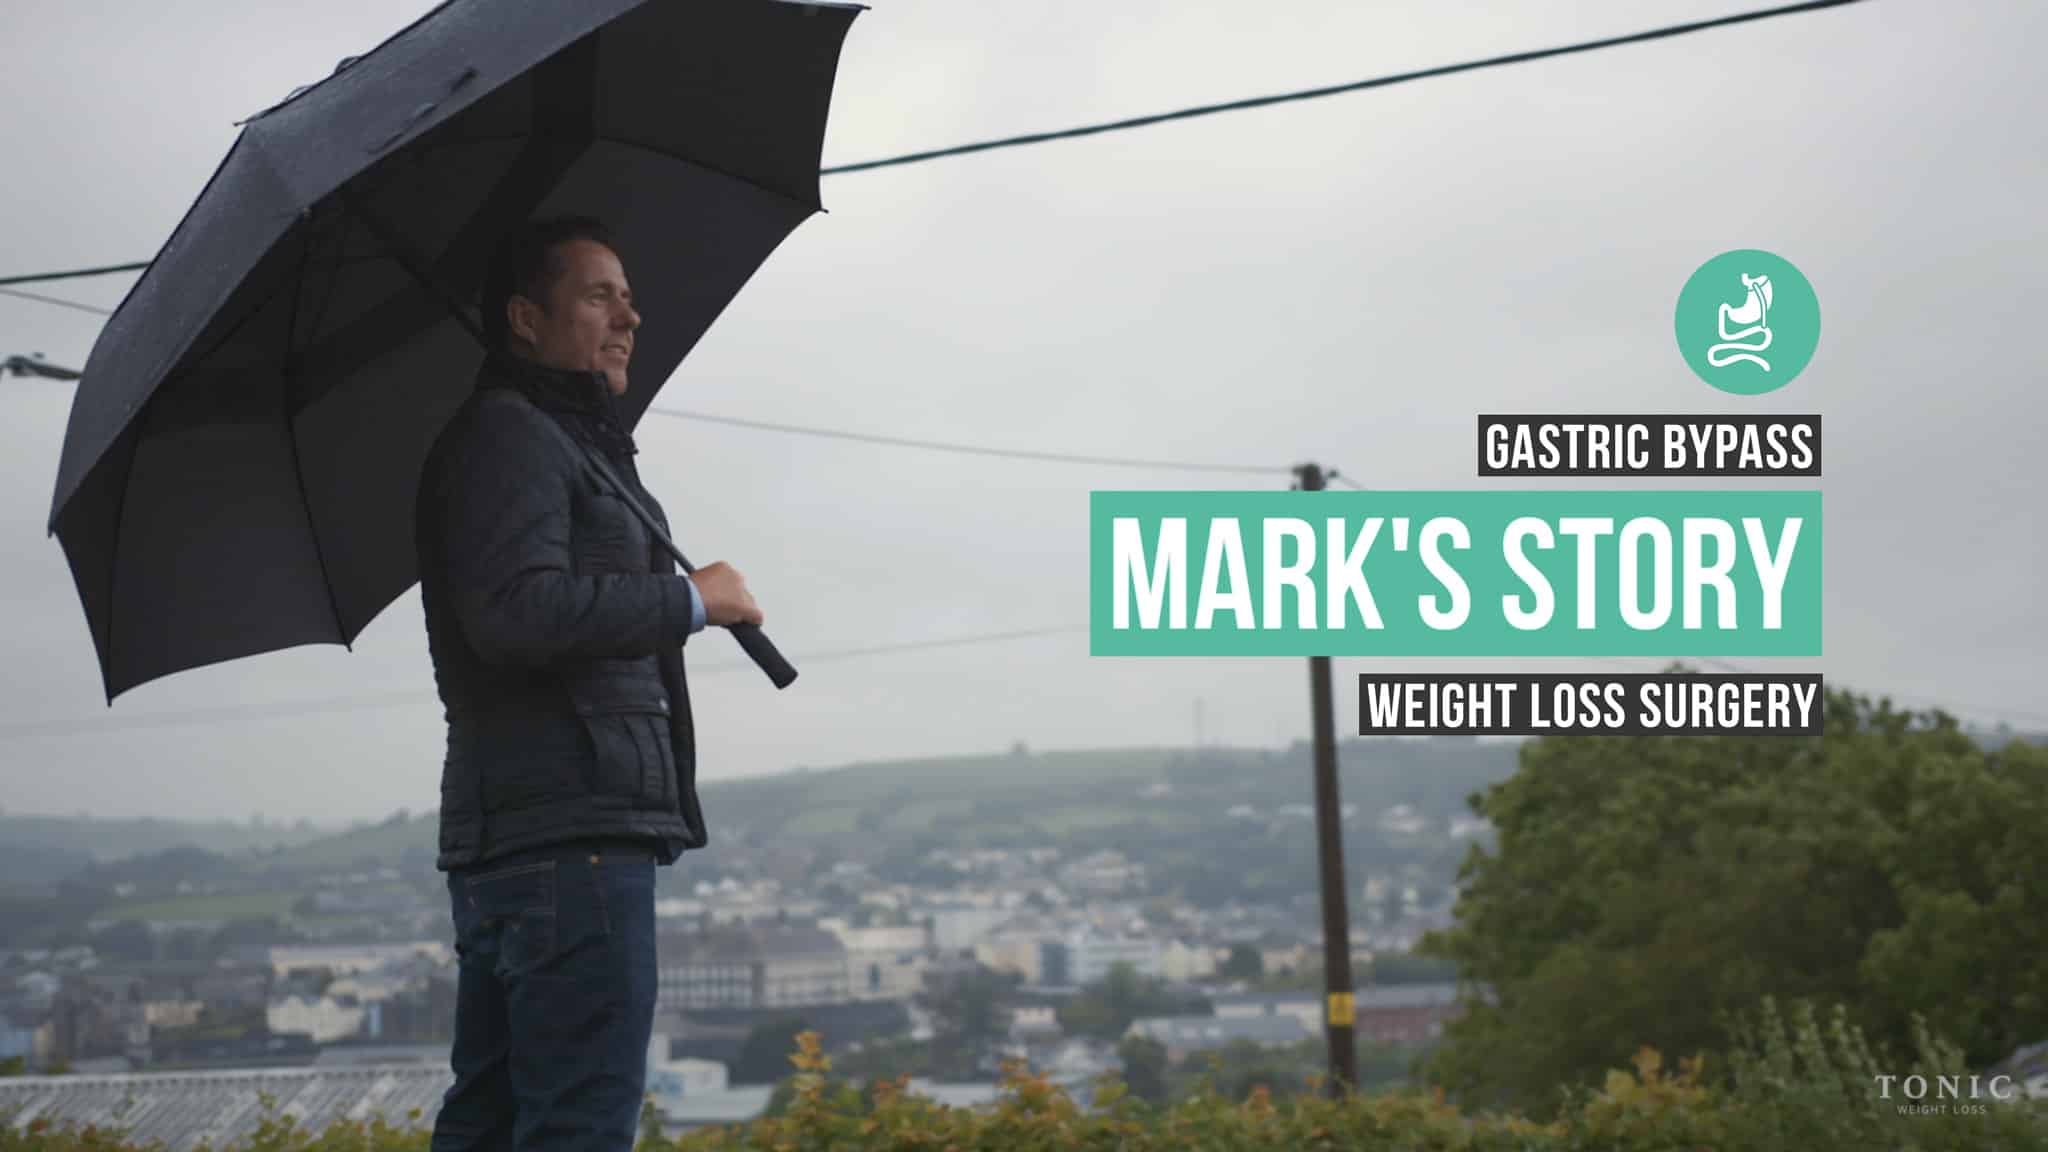 Tonic-Weight-Loss-Surgery-Gastric-Bypass--Mark's-Story